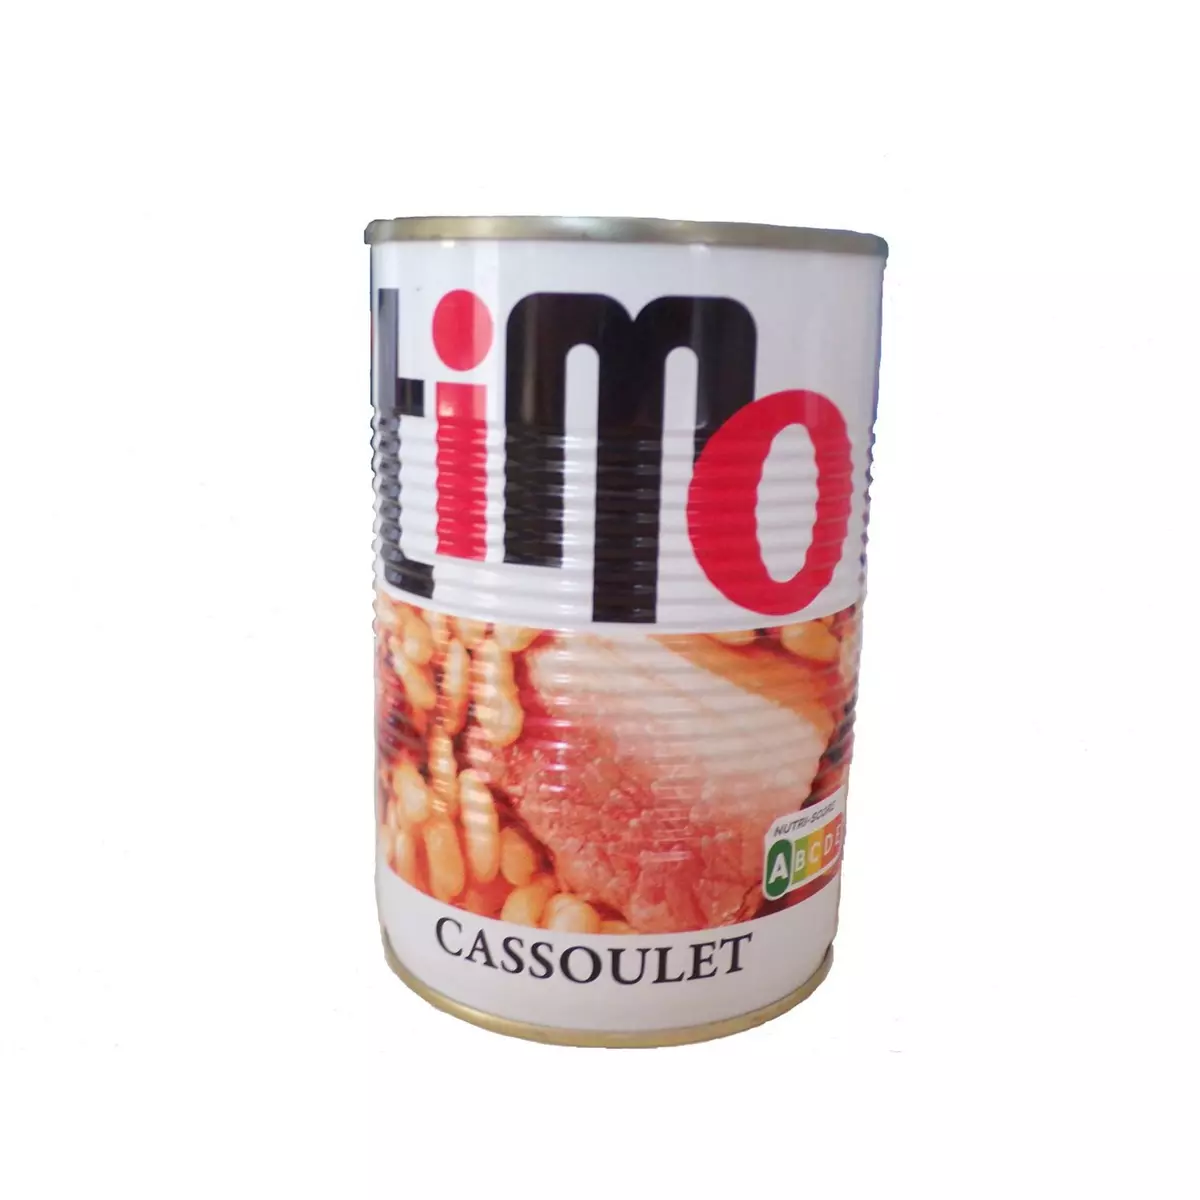 TIMO Cassoulet 1 personne 420g